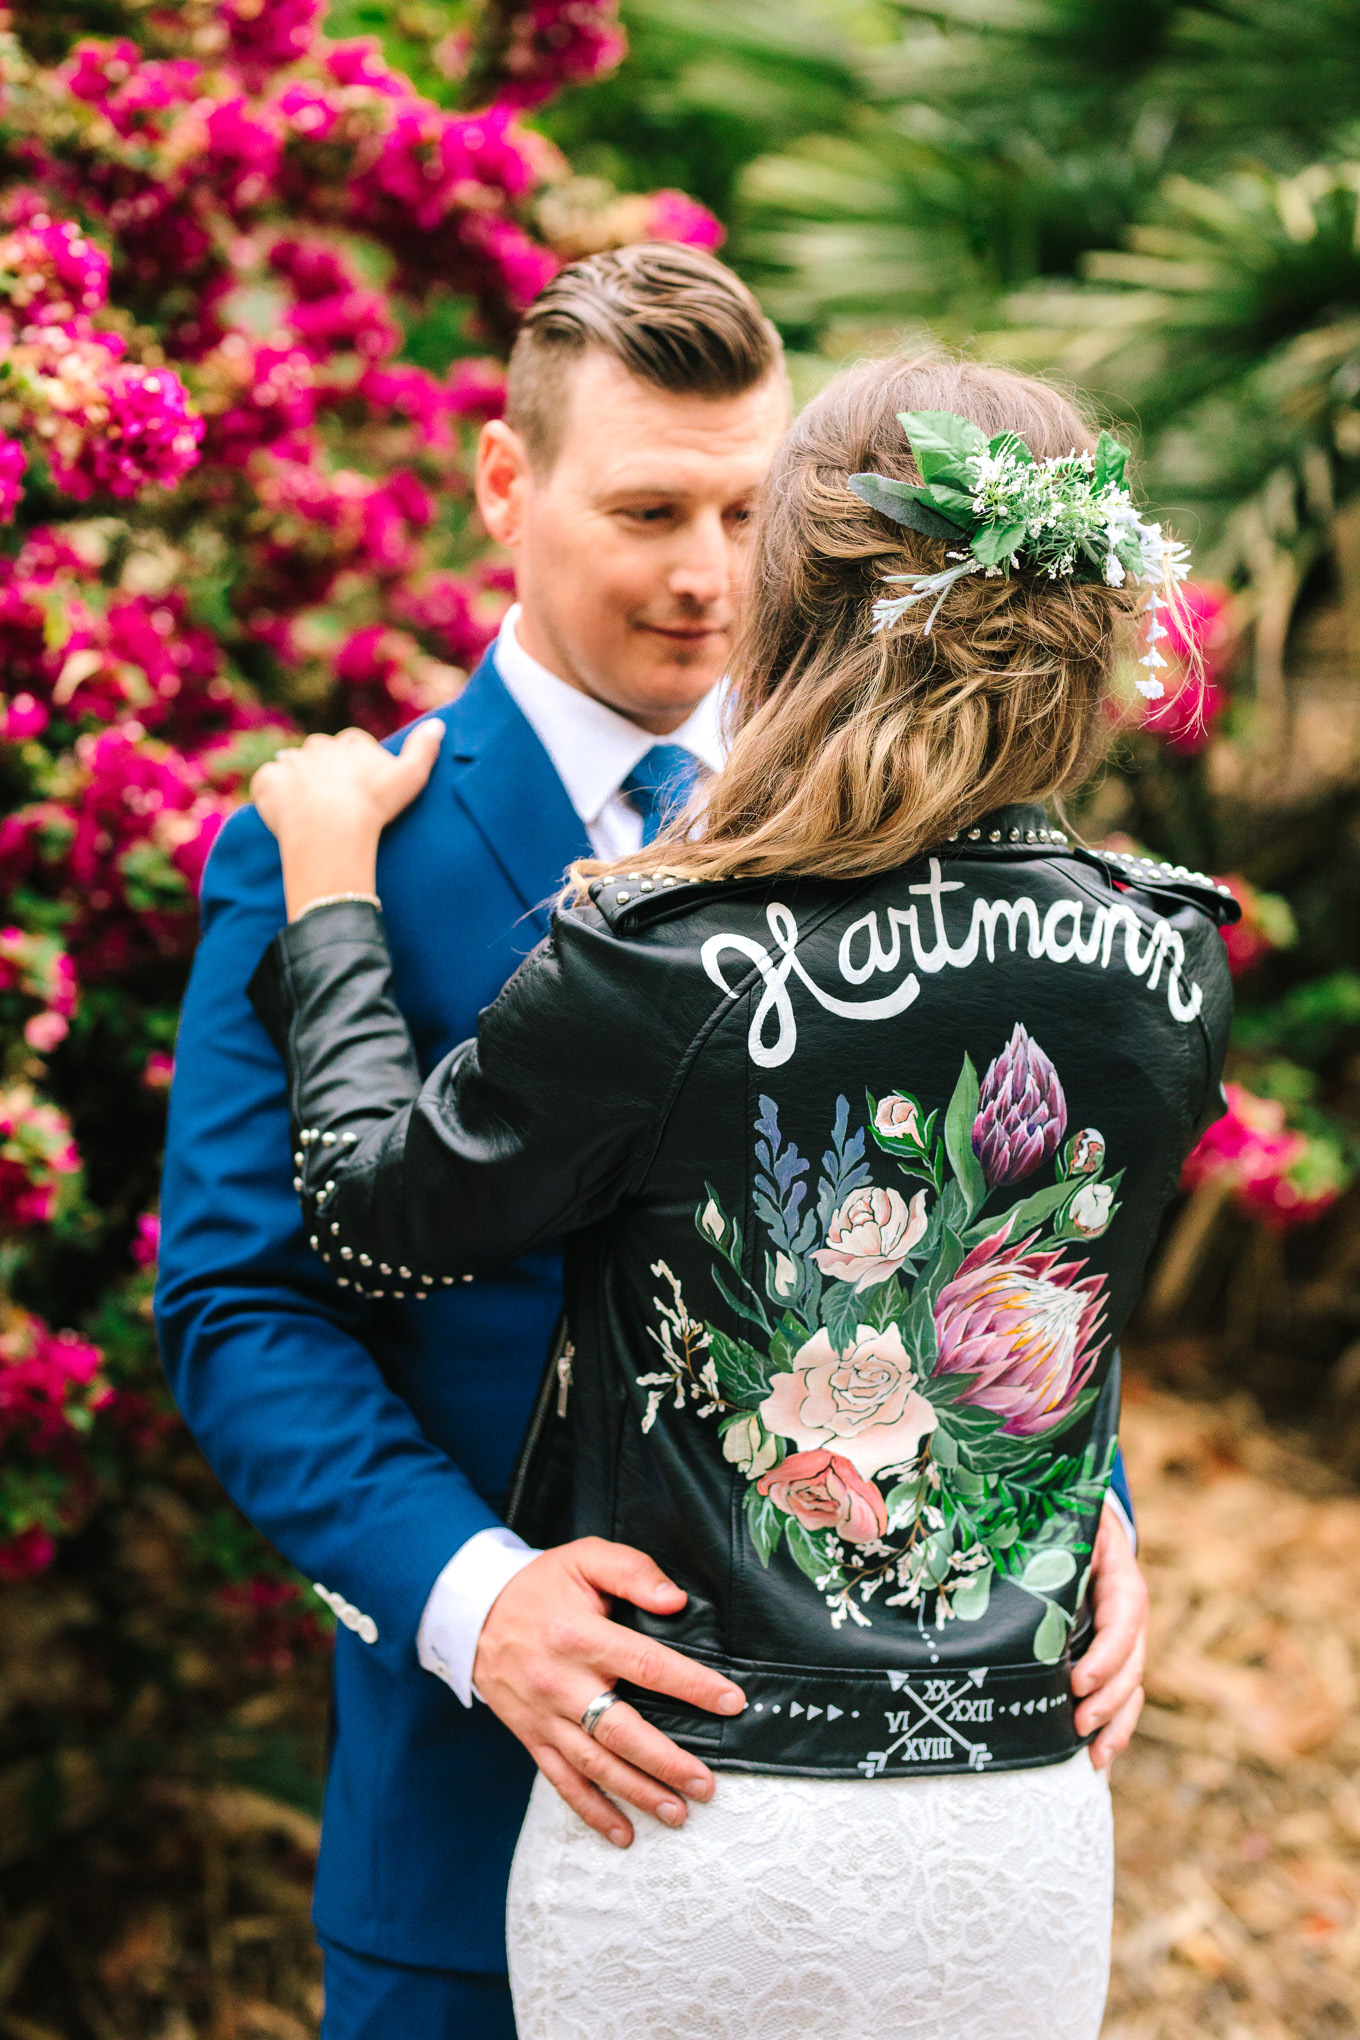 Bride in painted leather jacket at San Diego Botanic Garden wedding | Best Southern California Garden Wedding Venues | Colorful and elevated wedding photography for fun-loving couples | #gardenvenue #weddingvenue #socalweddingvenue #bouquetideas #uniquebouquet   Source: Mary Costa Photography | Los Angeles 